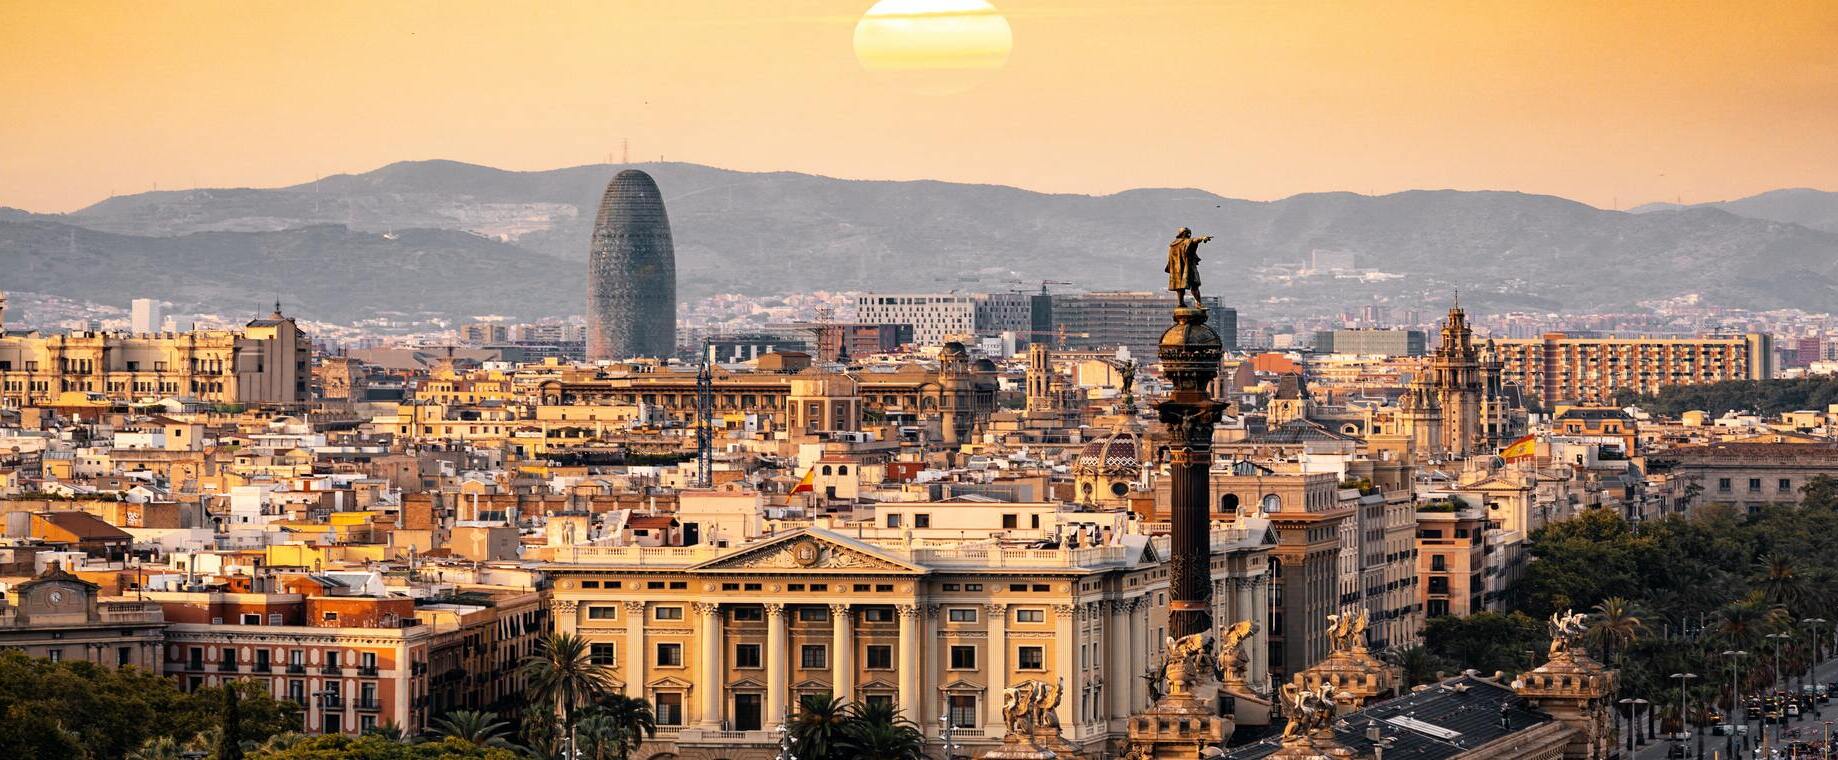 Don't miss the best offers for an unforgettable Summer trip to Spain 
Barcelona from 105$